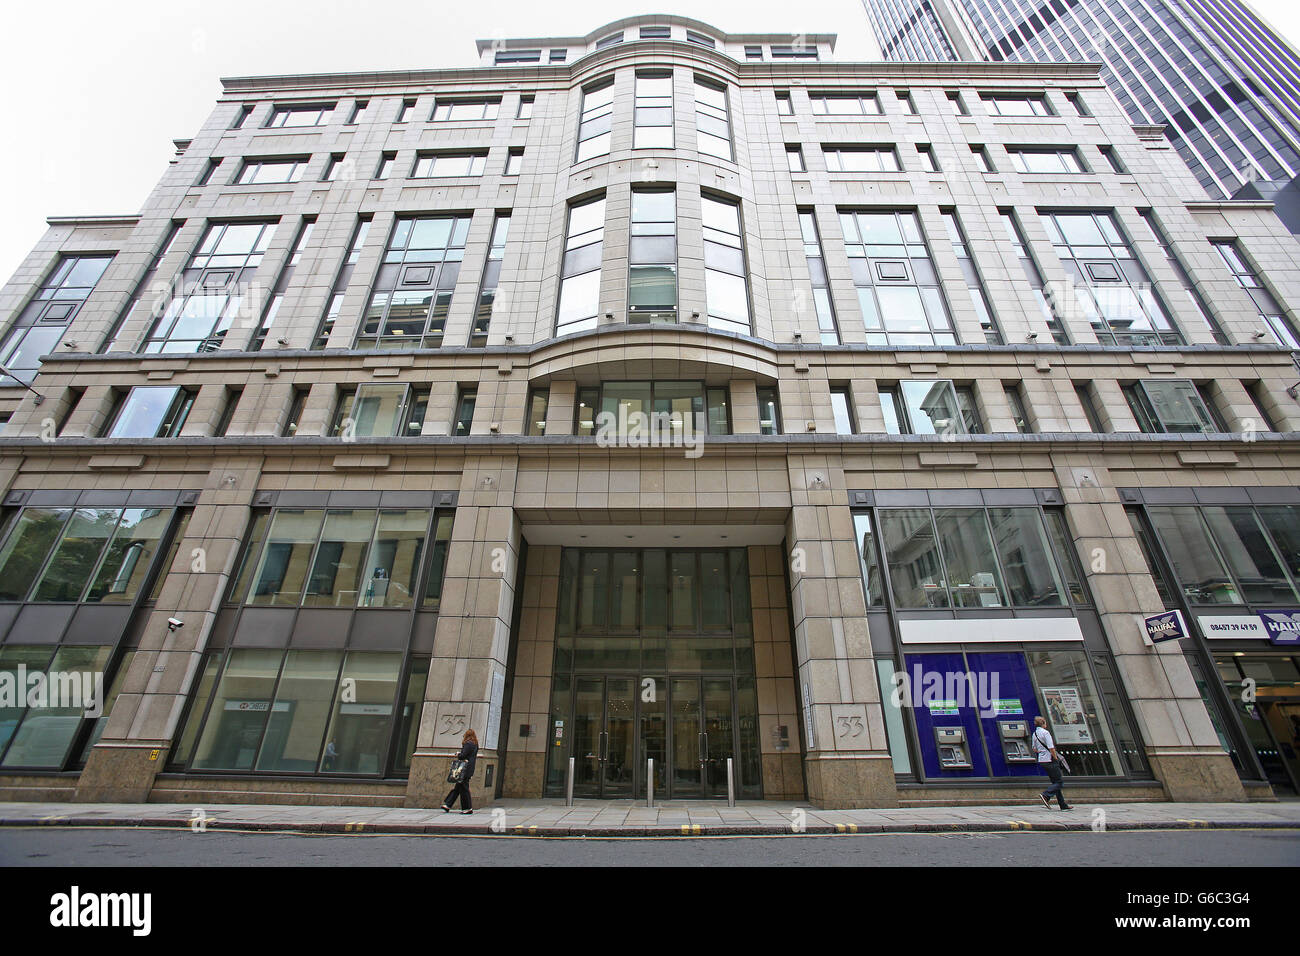 FTSE stock. General view of the Scottish Widows Investment Partnership offices in Old Broad Street in London. Stock Photo